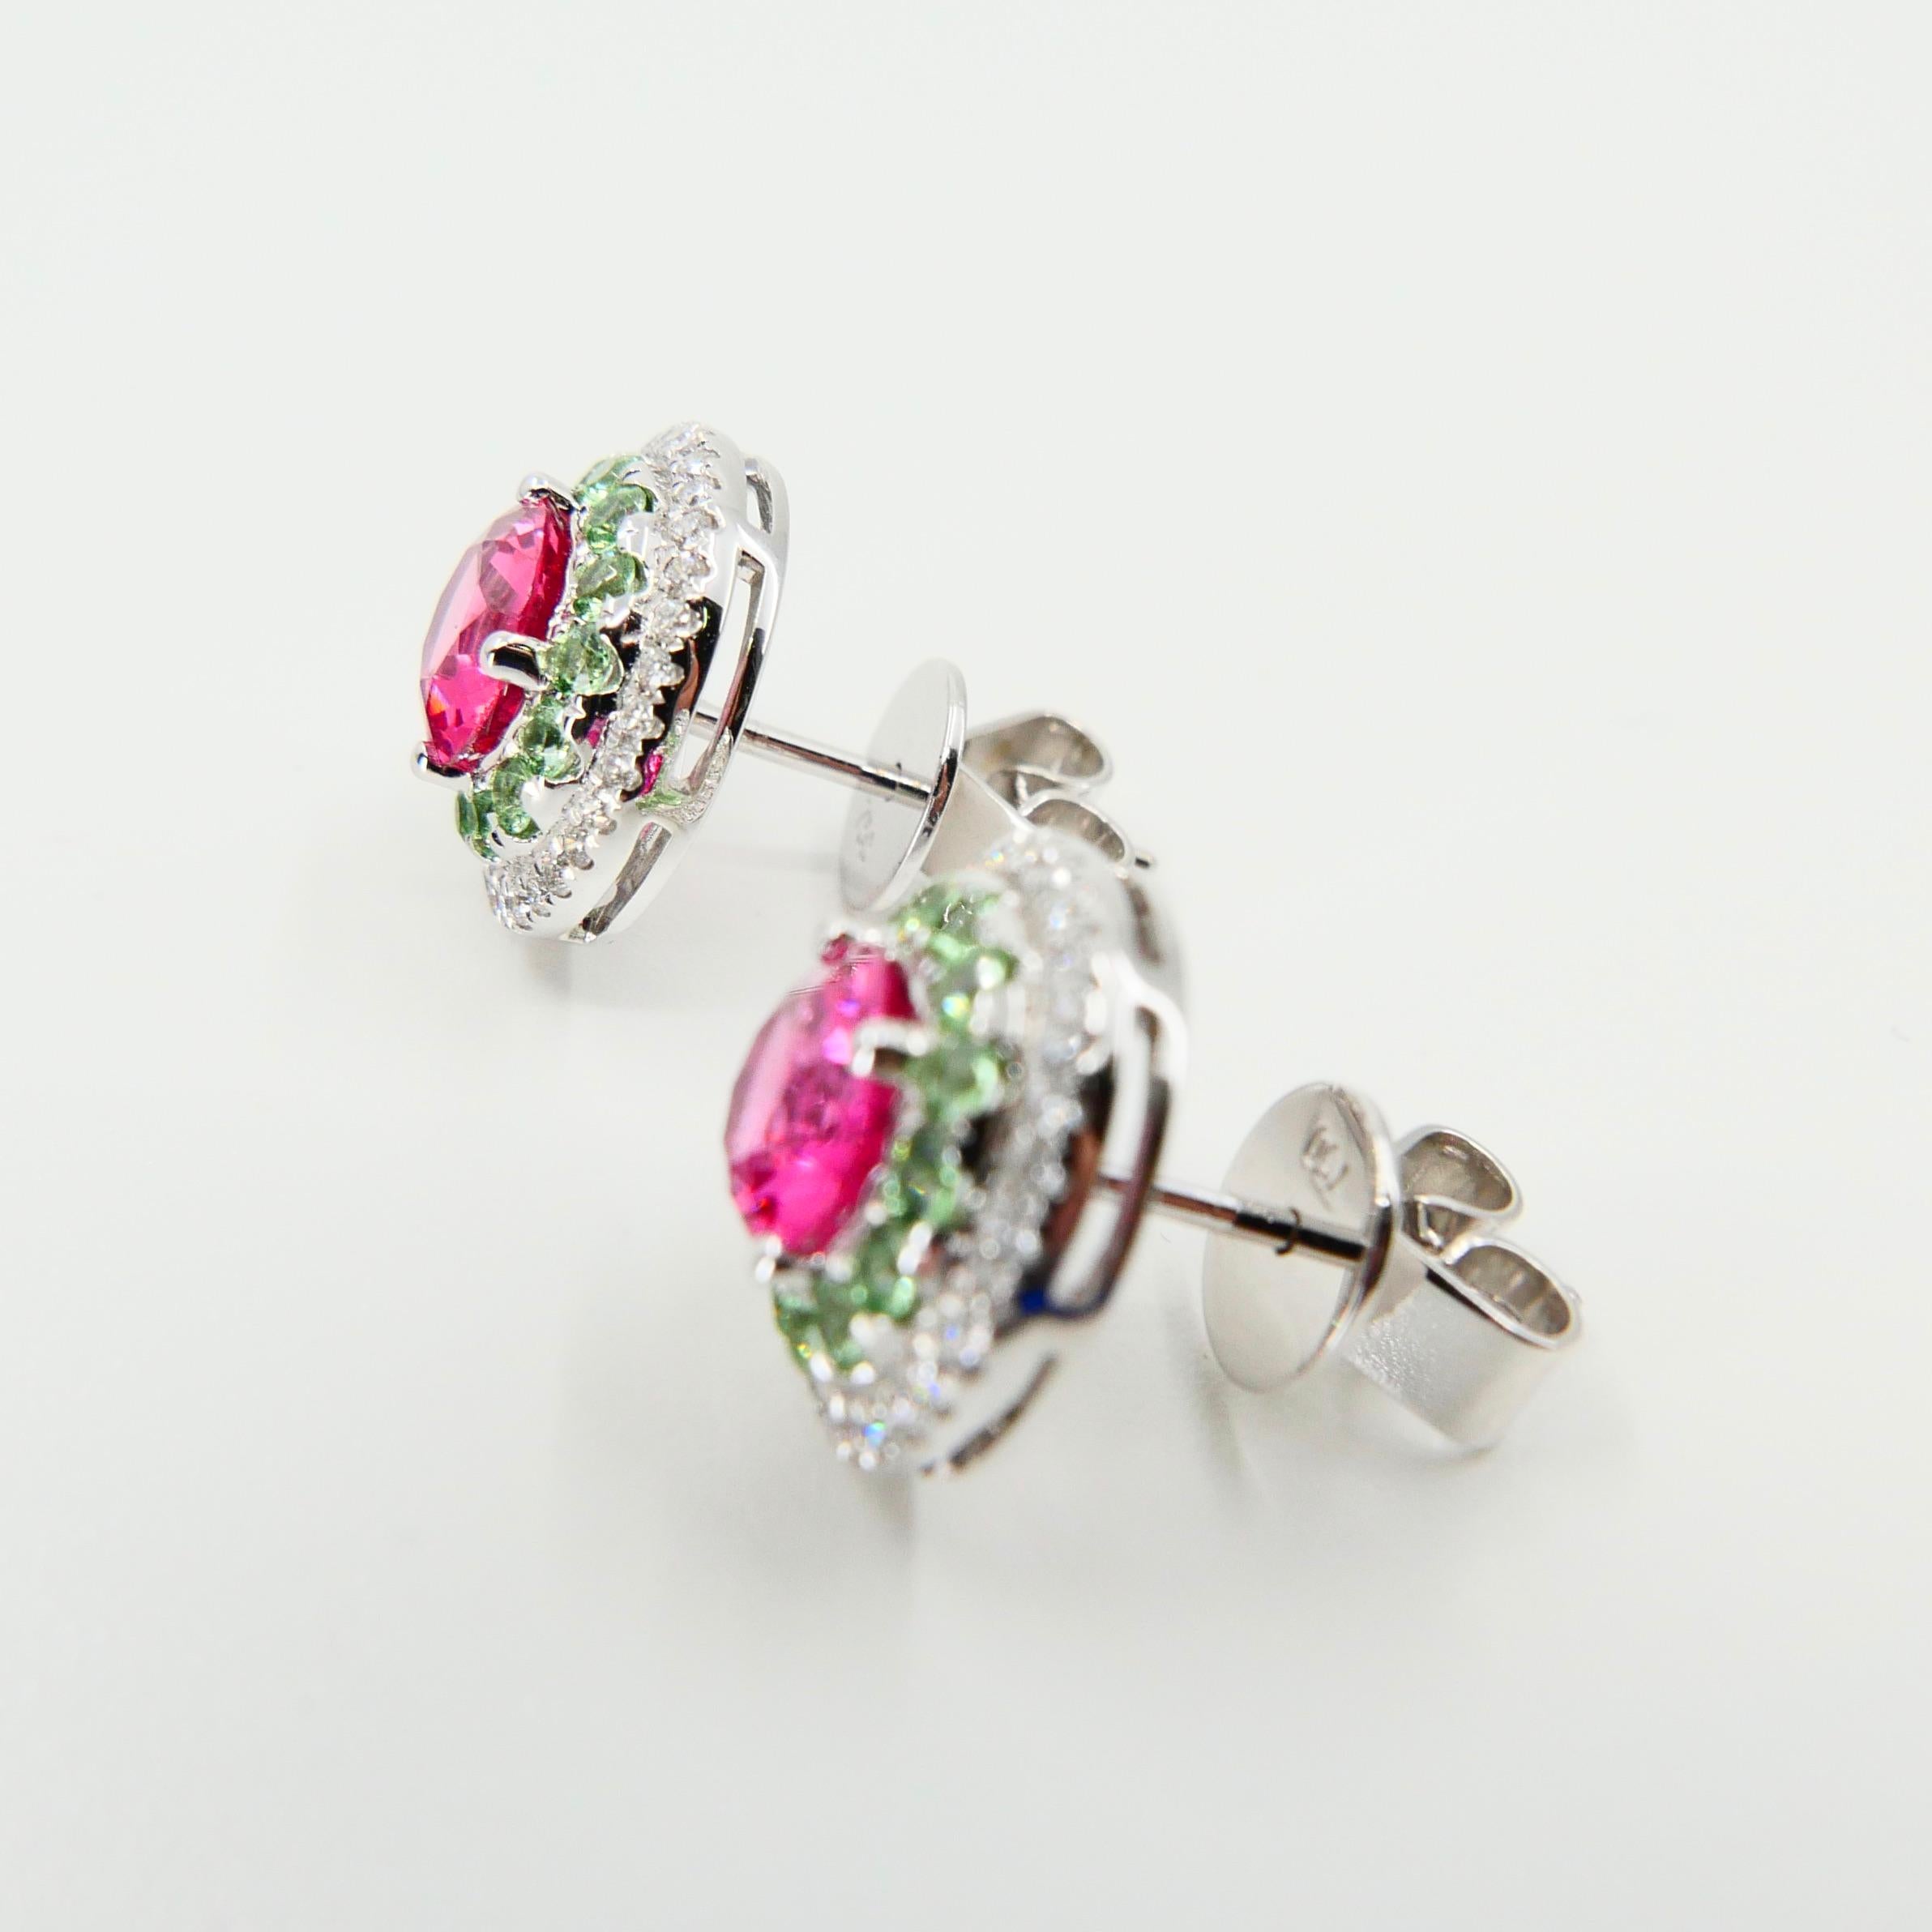 Natural 1.53 Carat Vivid Neon Pink Spinel Peridot and Diamond Earrings, 18k Gold 4